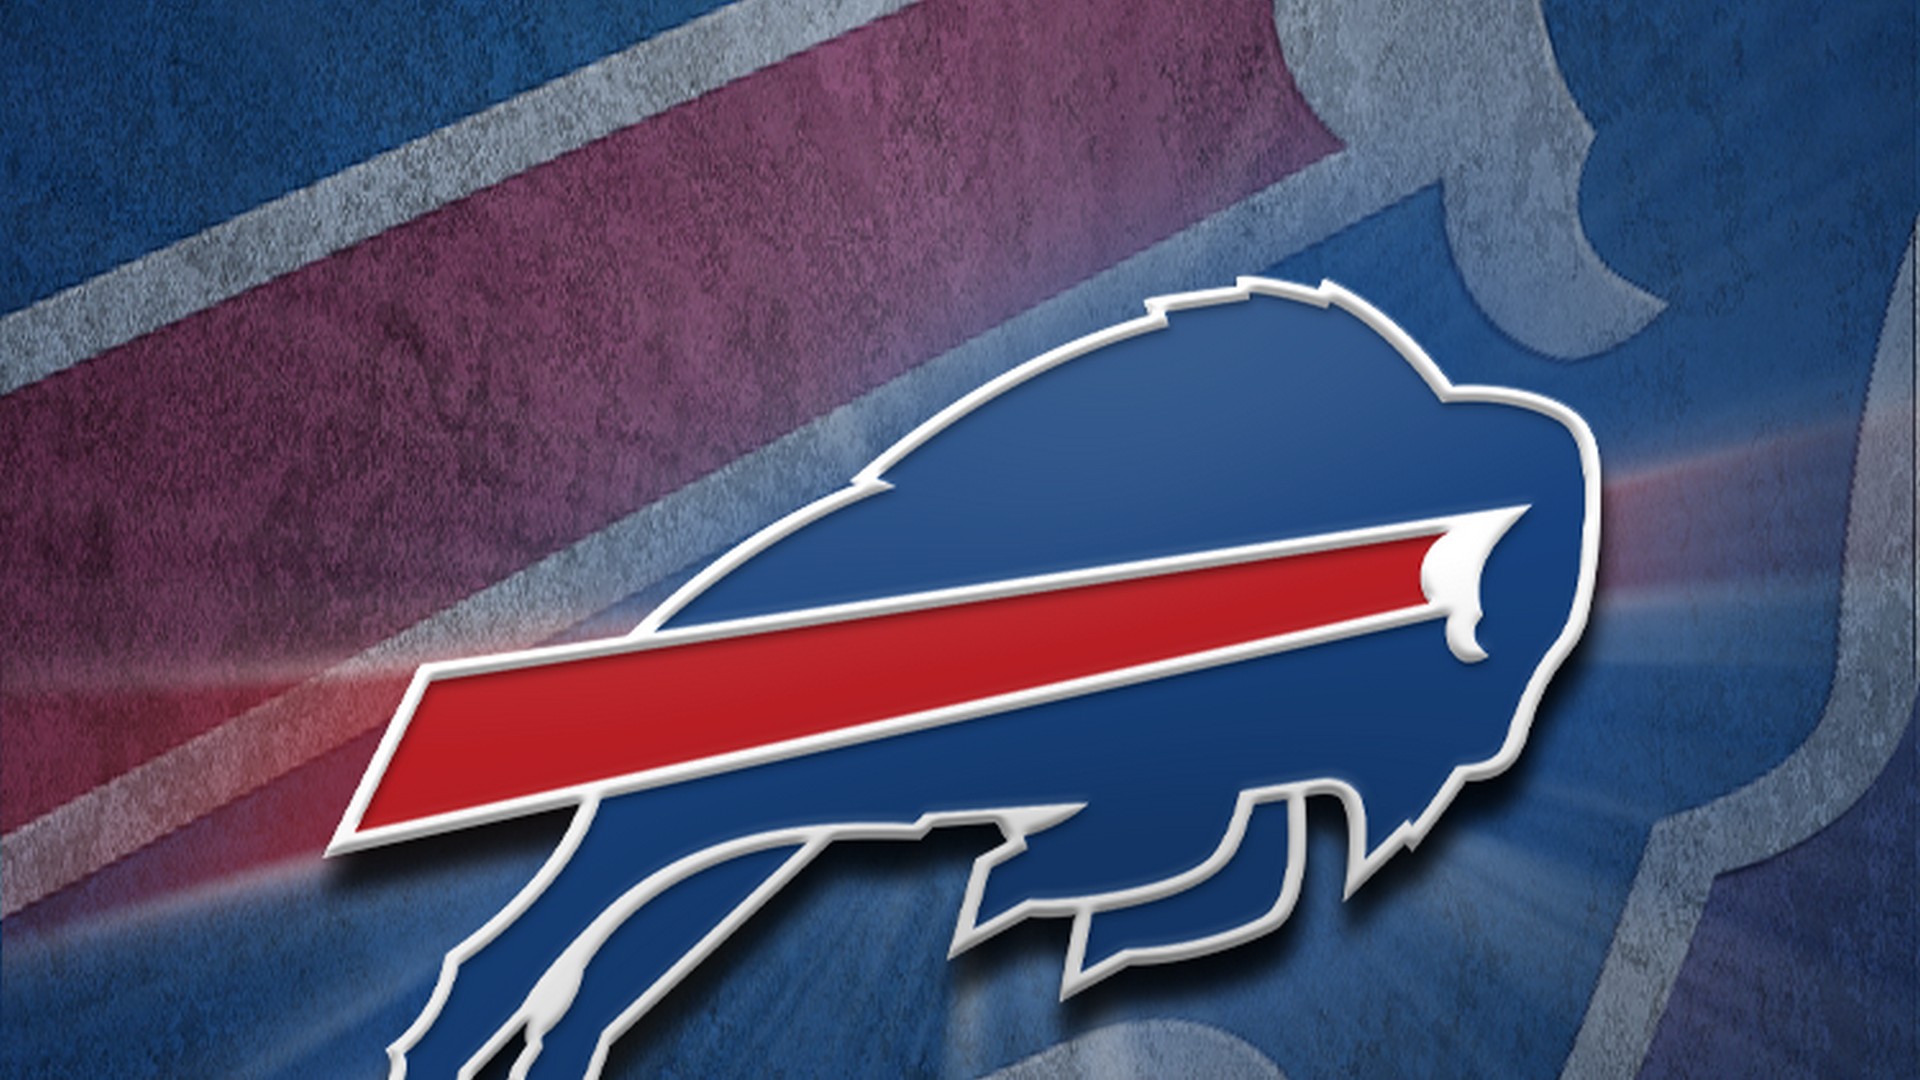 HD Buffalo Bills NFL Backgrounds with high-resolution 1920x1080 pixel. You can use this wallpaper for your Mac or Windows Desktop Background, iPhone, Android or Tablet and another Smartphone device